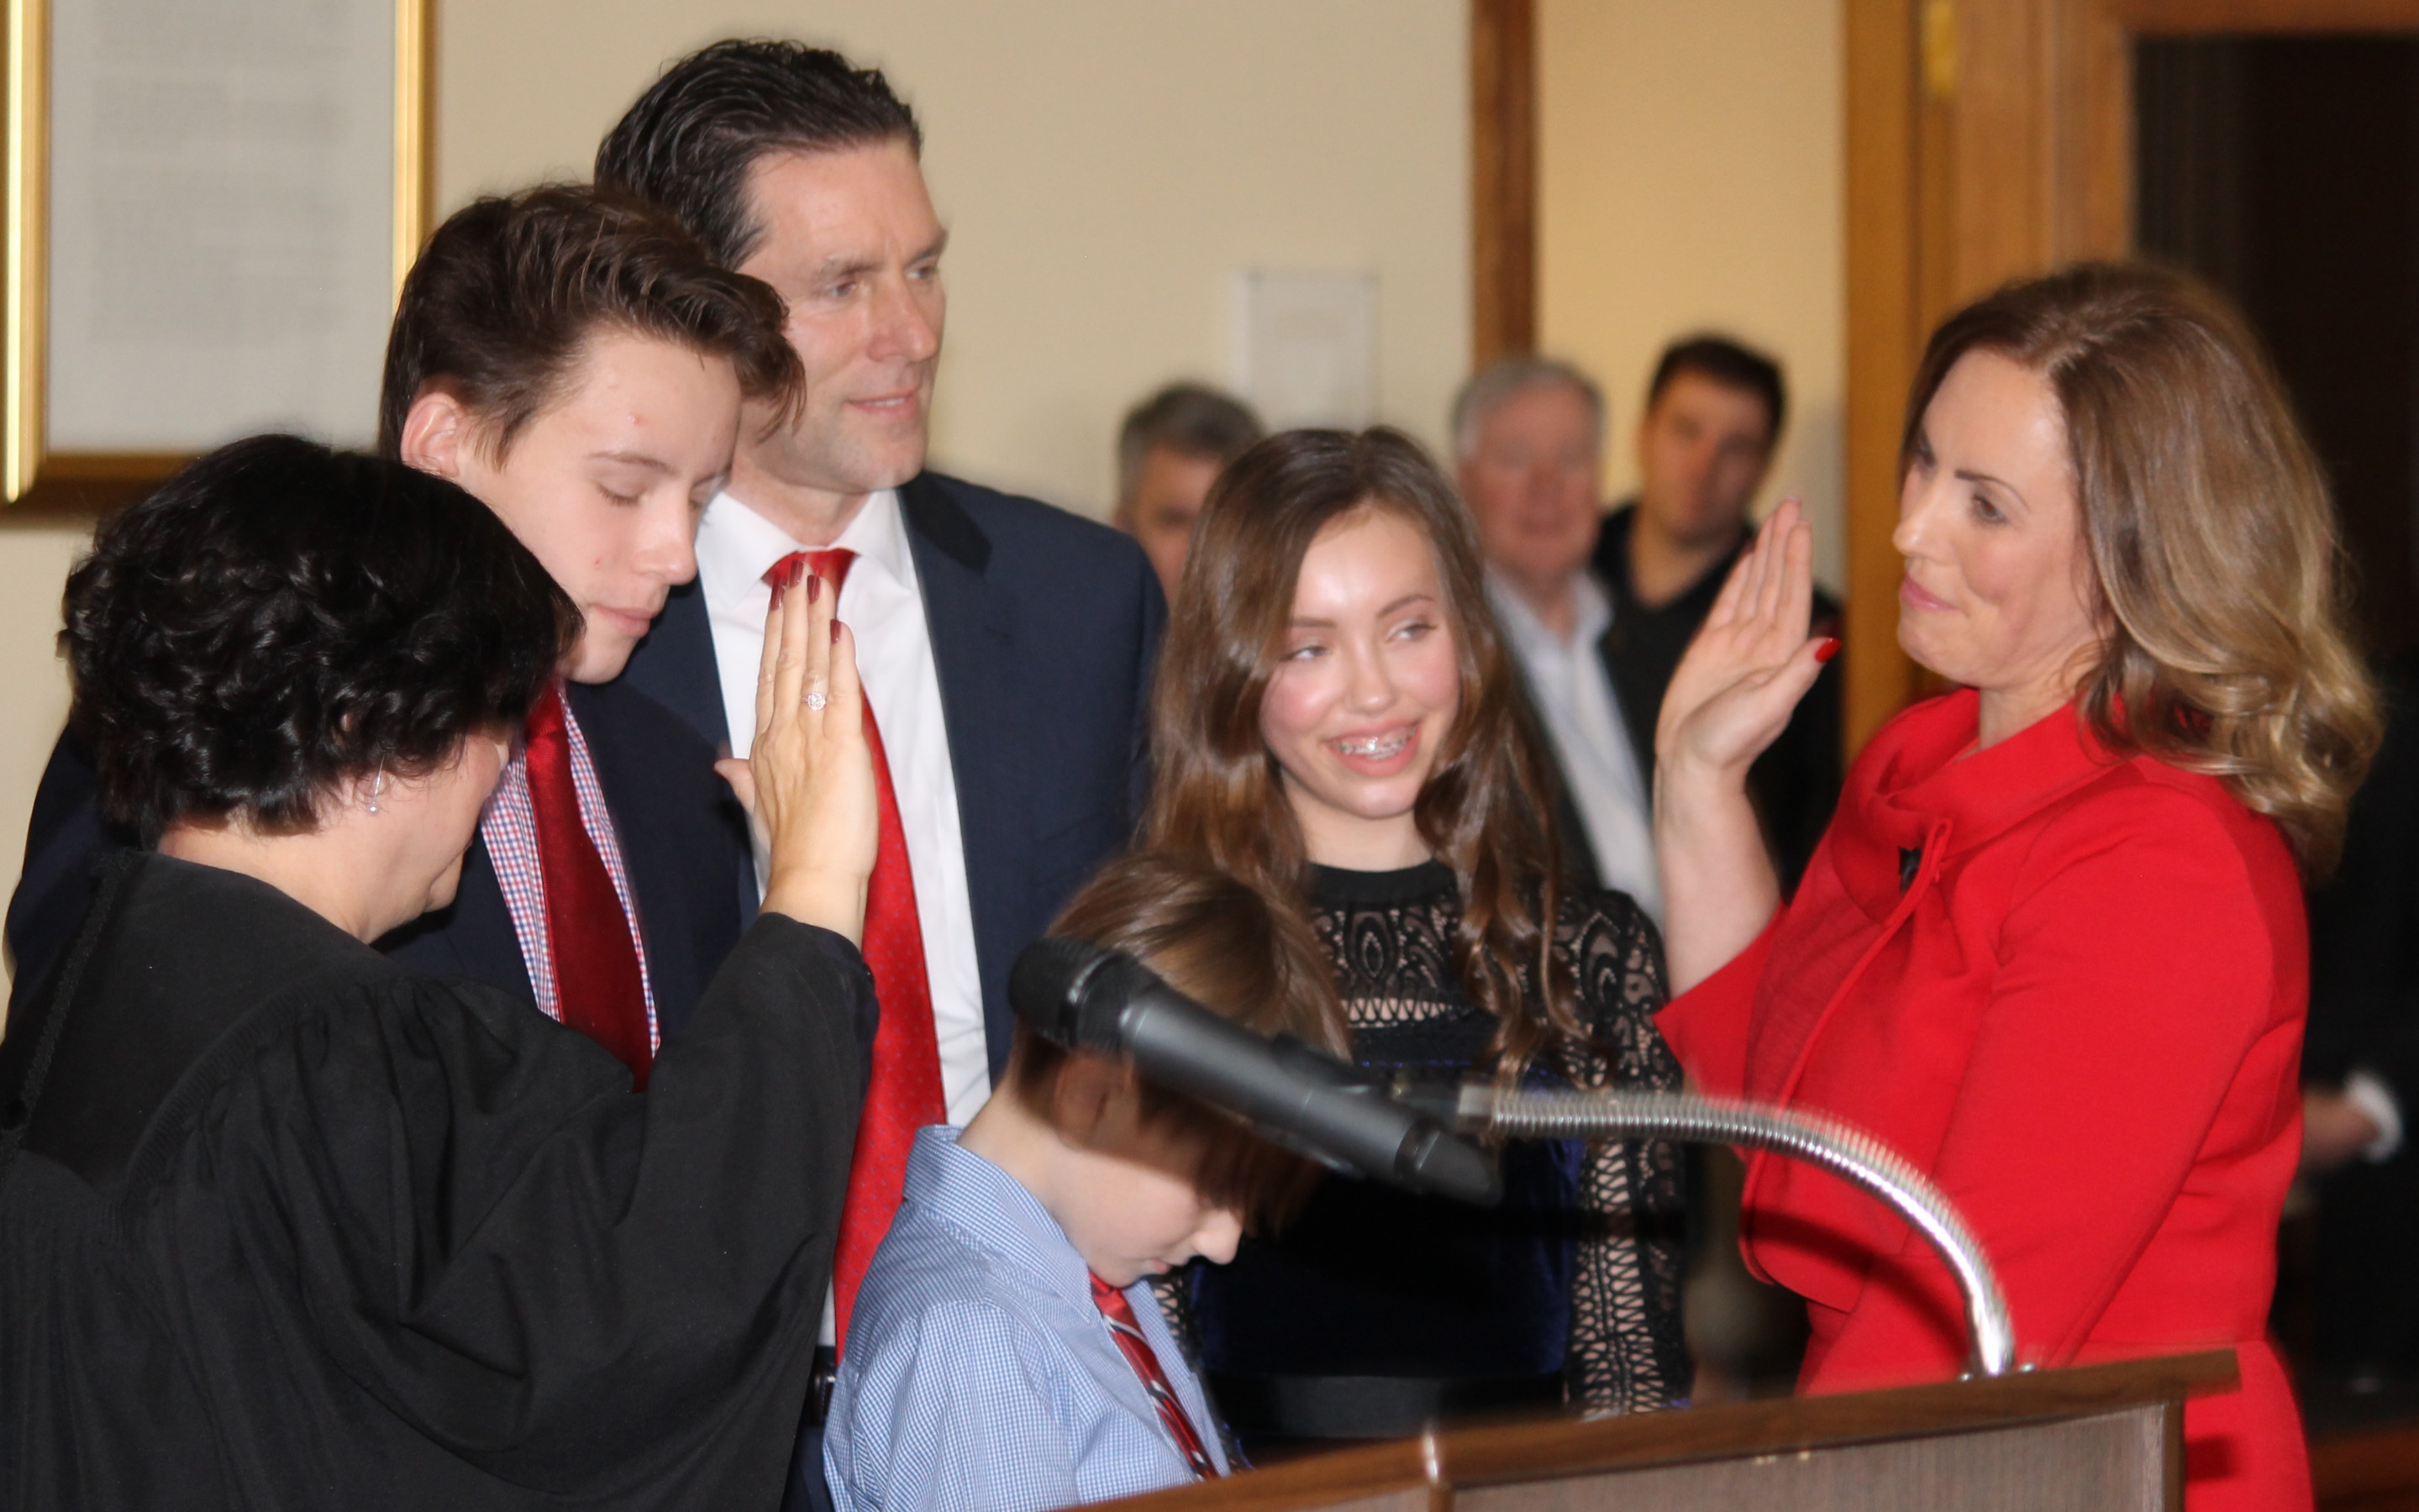 The new Niagara County District Attorney Caroline Wojtaszek is sworn in by Niagara County Judge Sara Sheldon as her husband Henry and son and daughter look on.